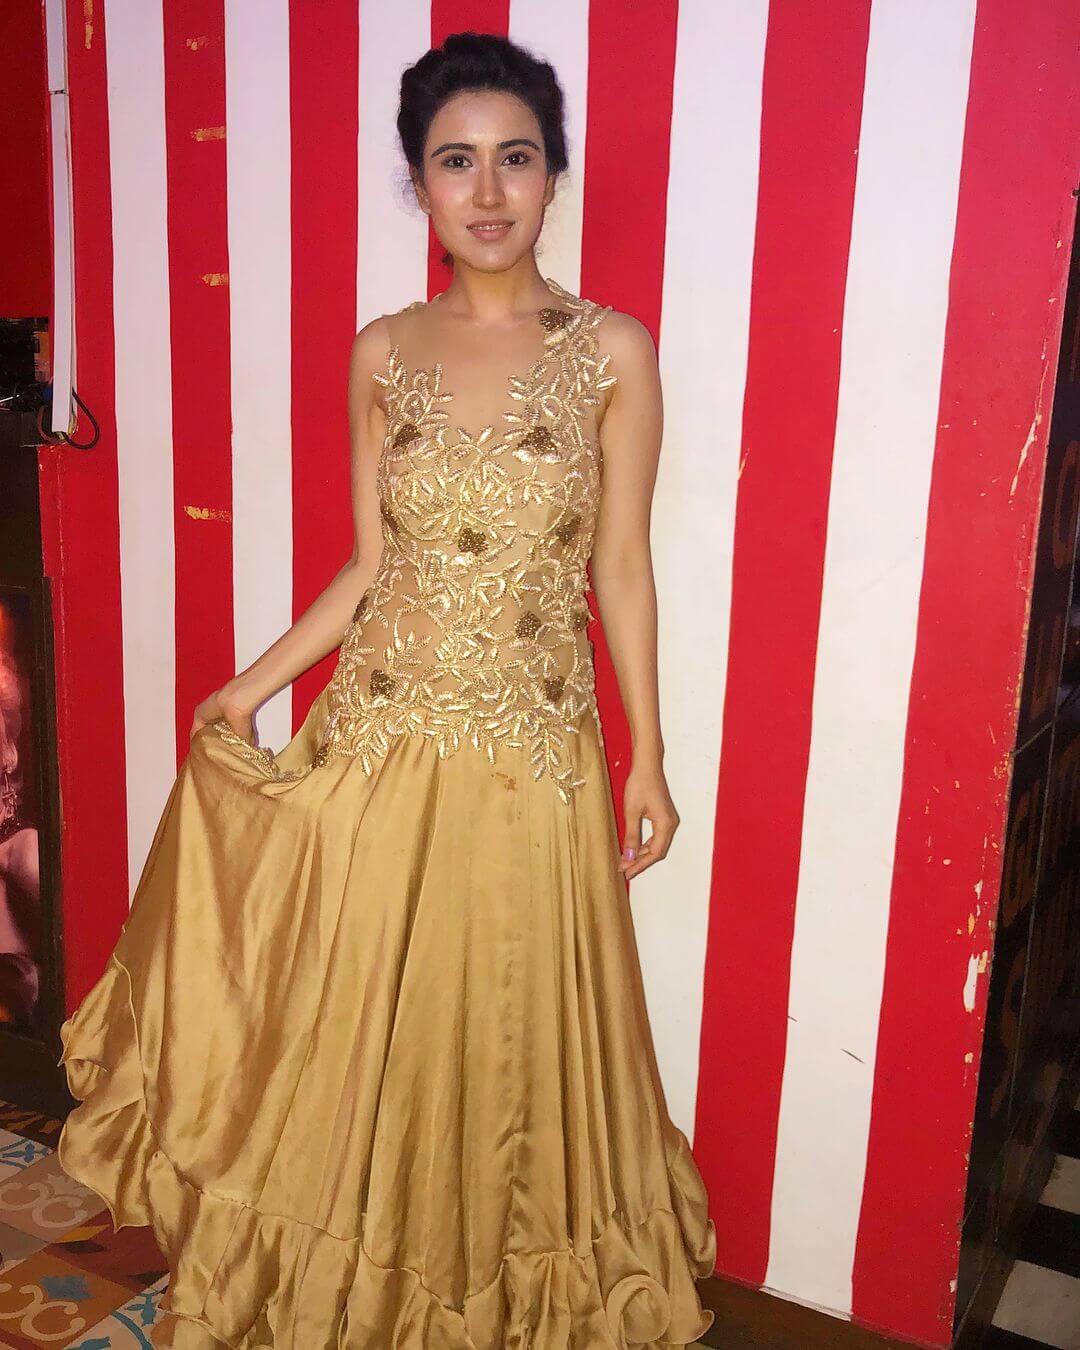 Sheena Simple Look In Golden Dress Outfit